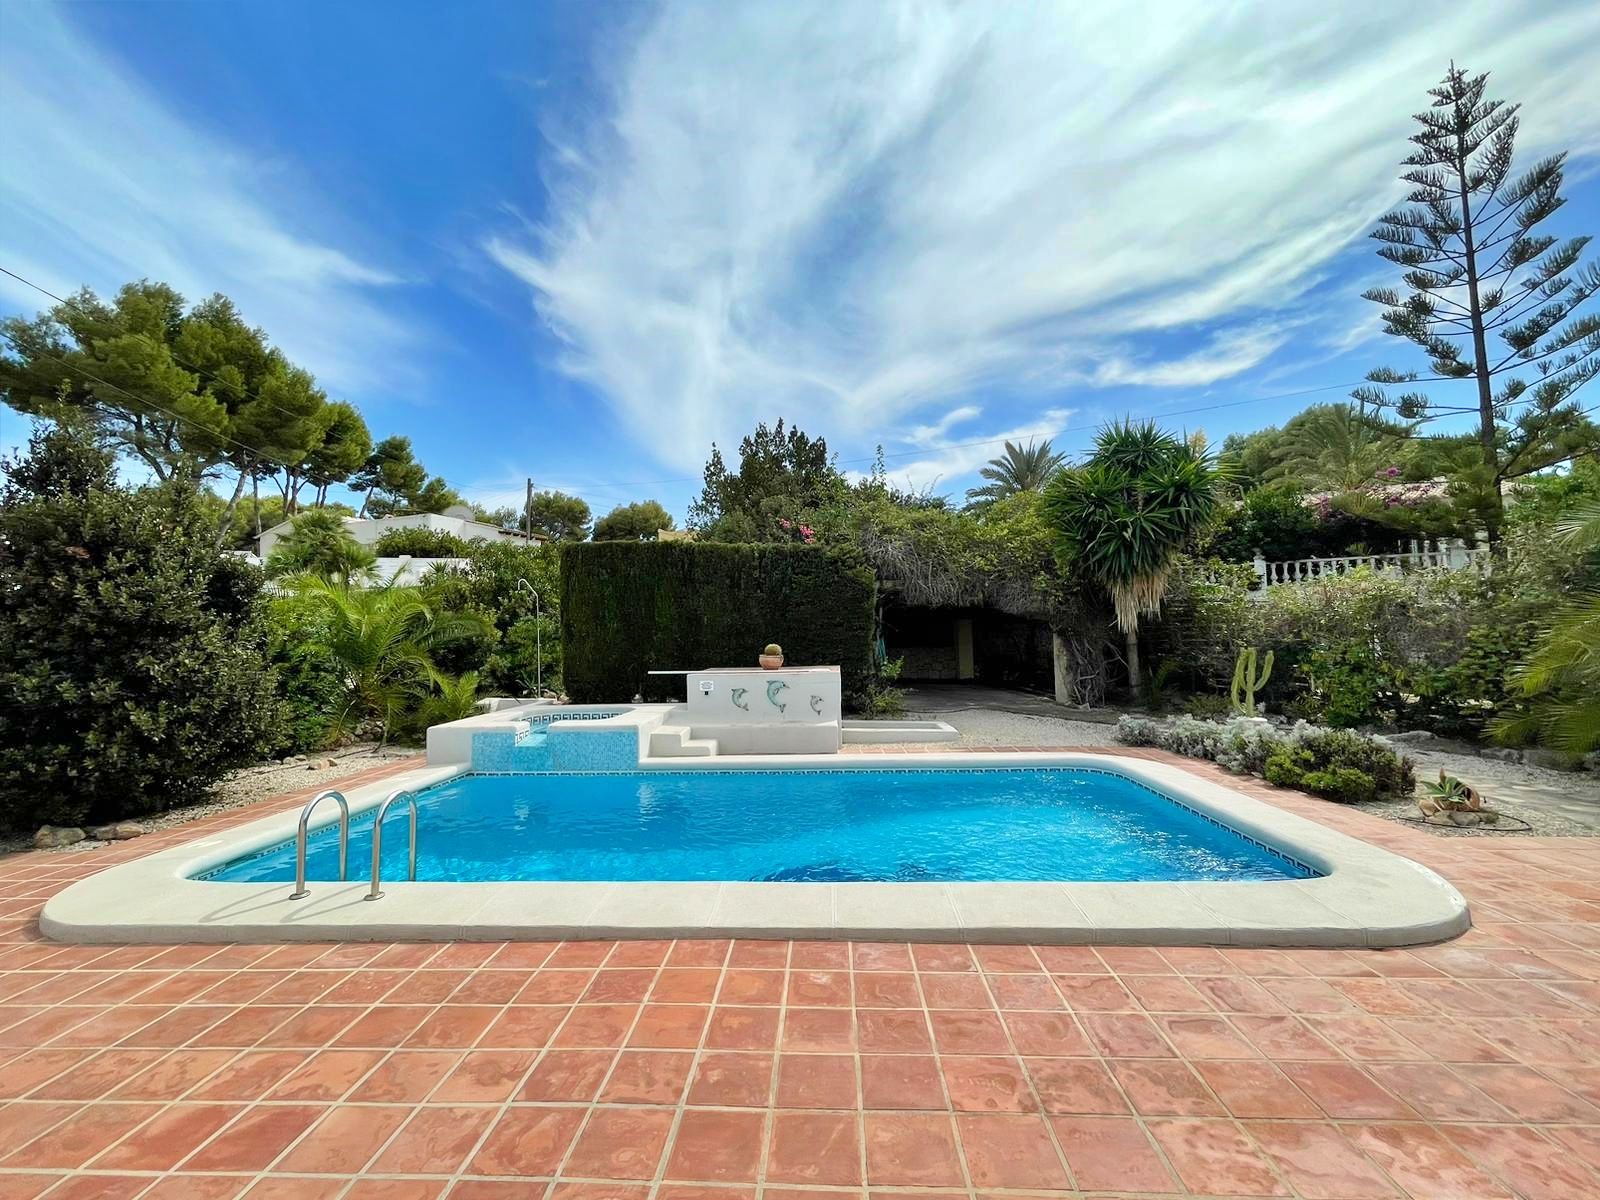 Long-term rental Villa with pool and enclosed garden, close to Moraira town